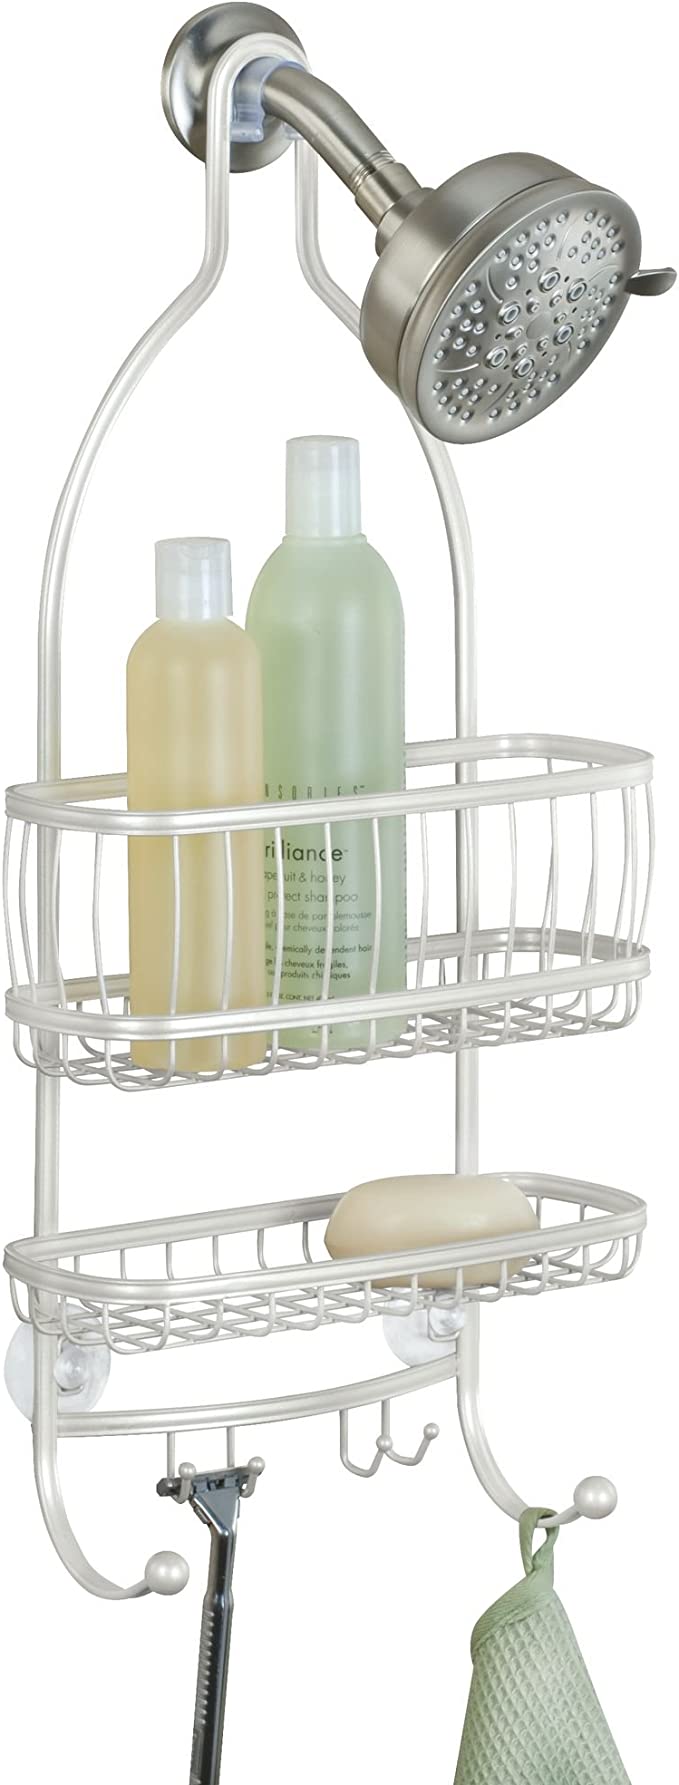 OMAIRA Adhesive Shower Caddy With Hooks, 2 Pack